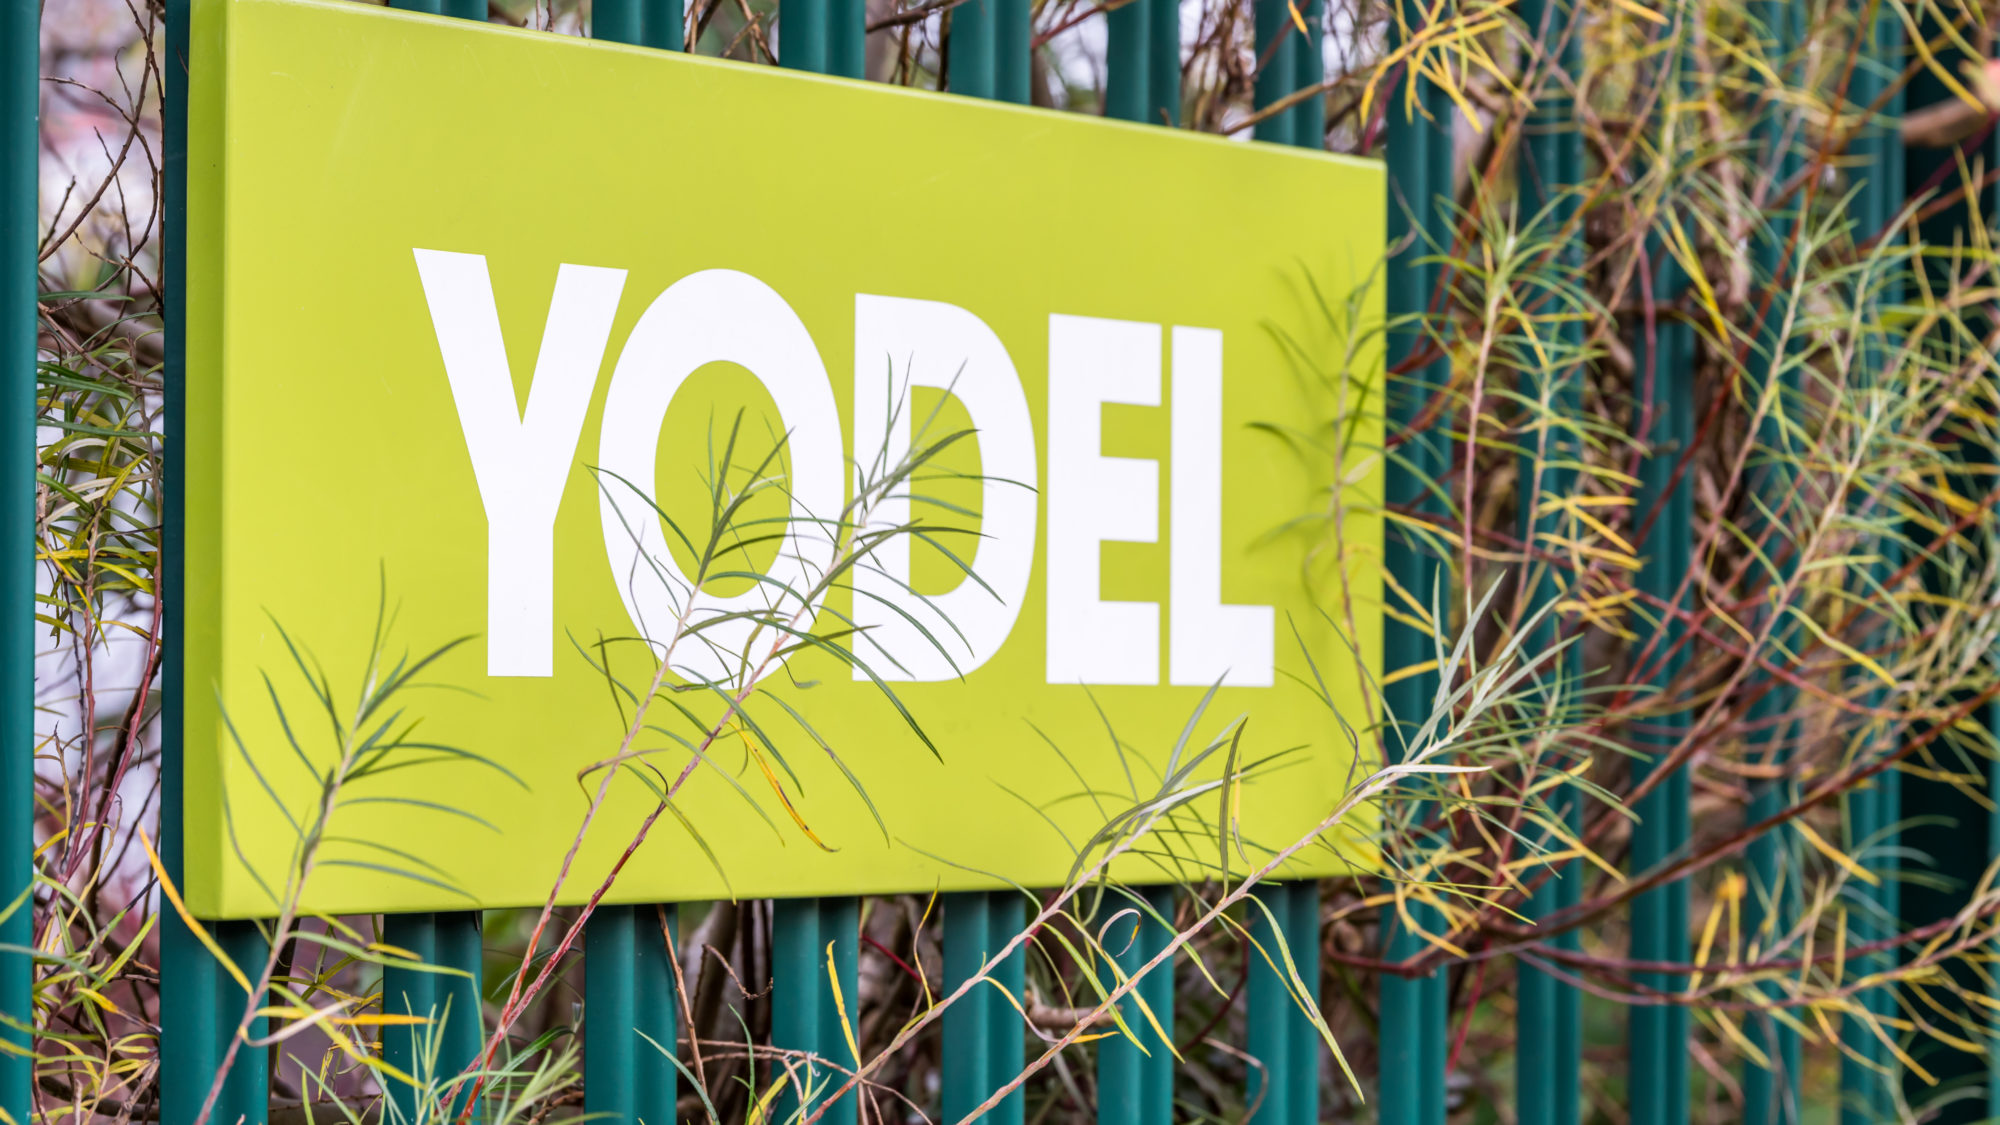 Yodel set to close Shaw site